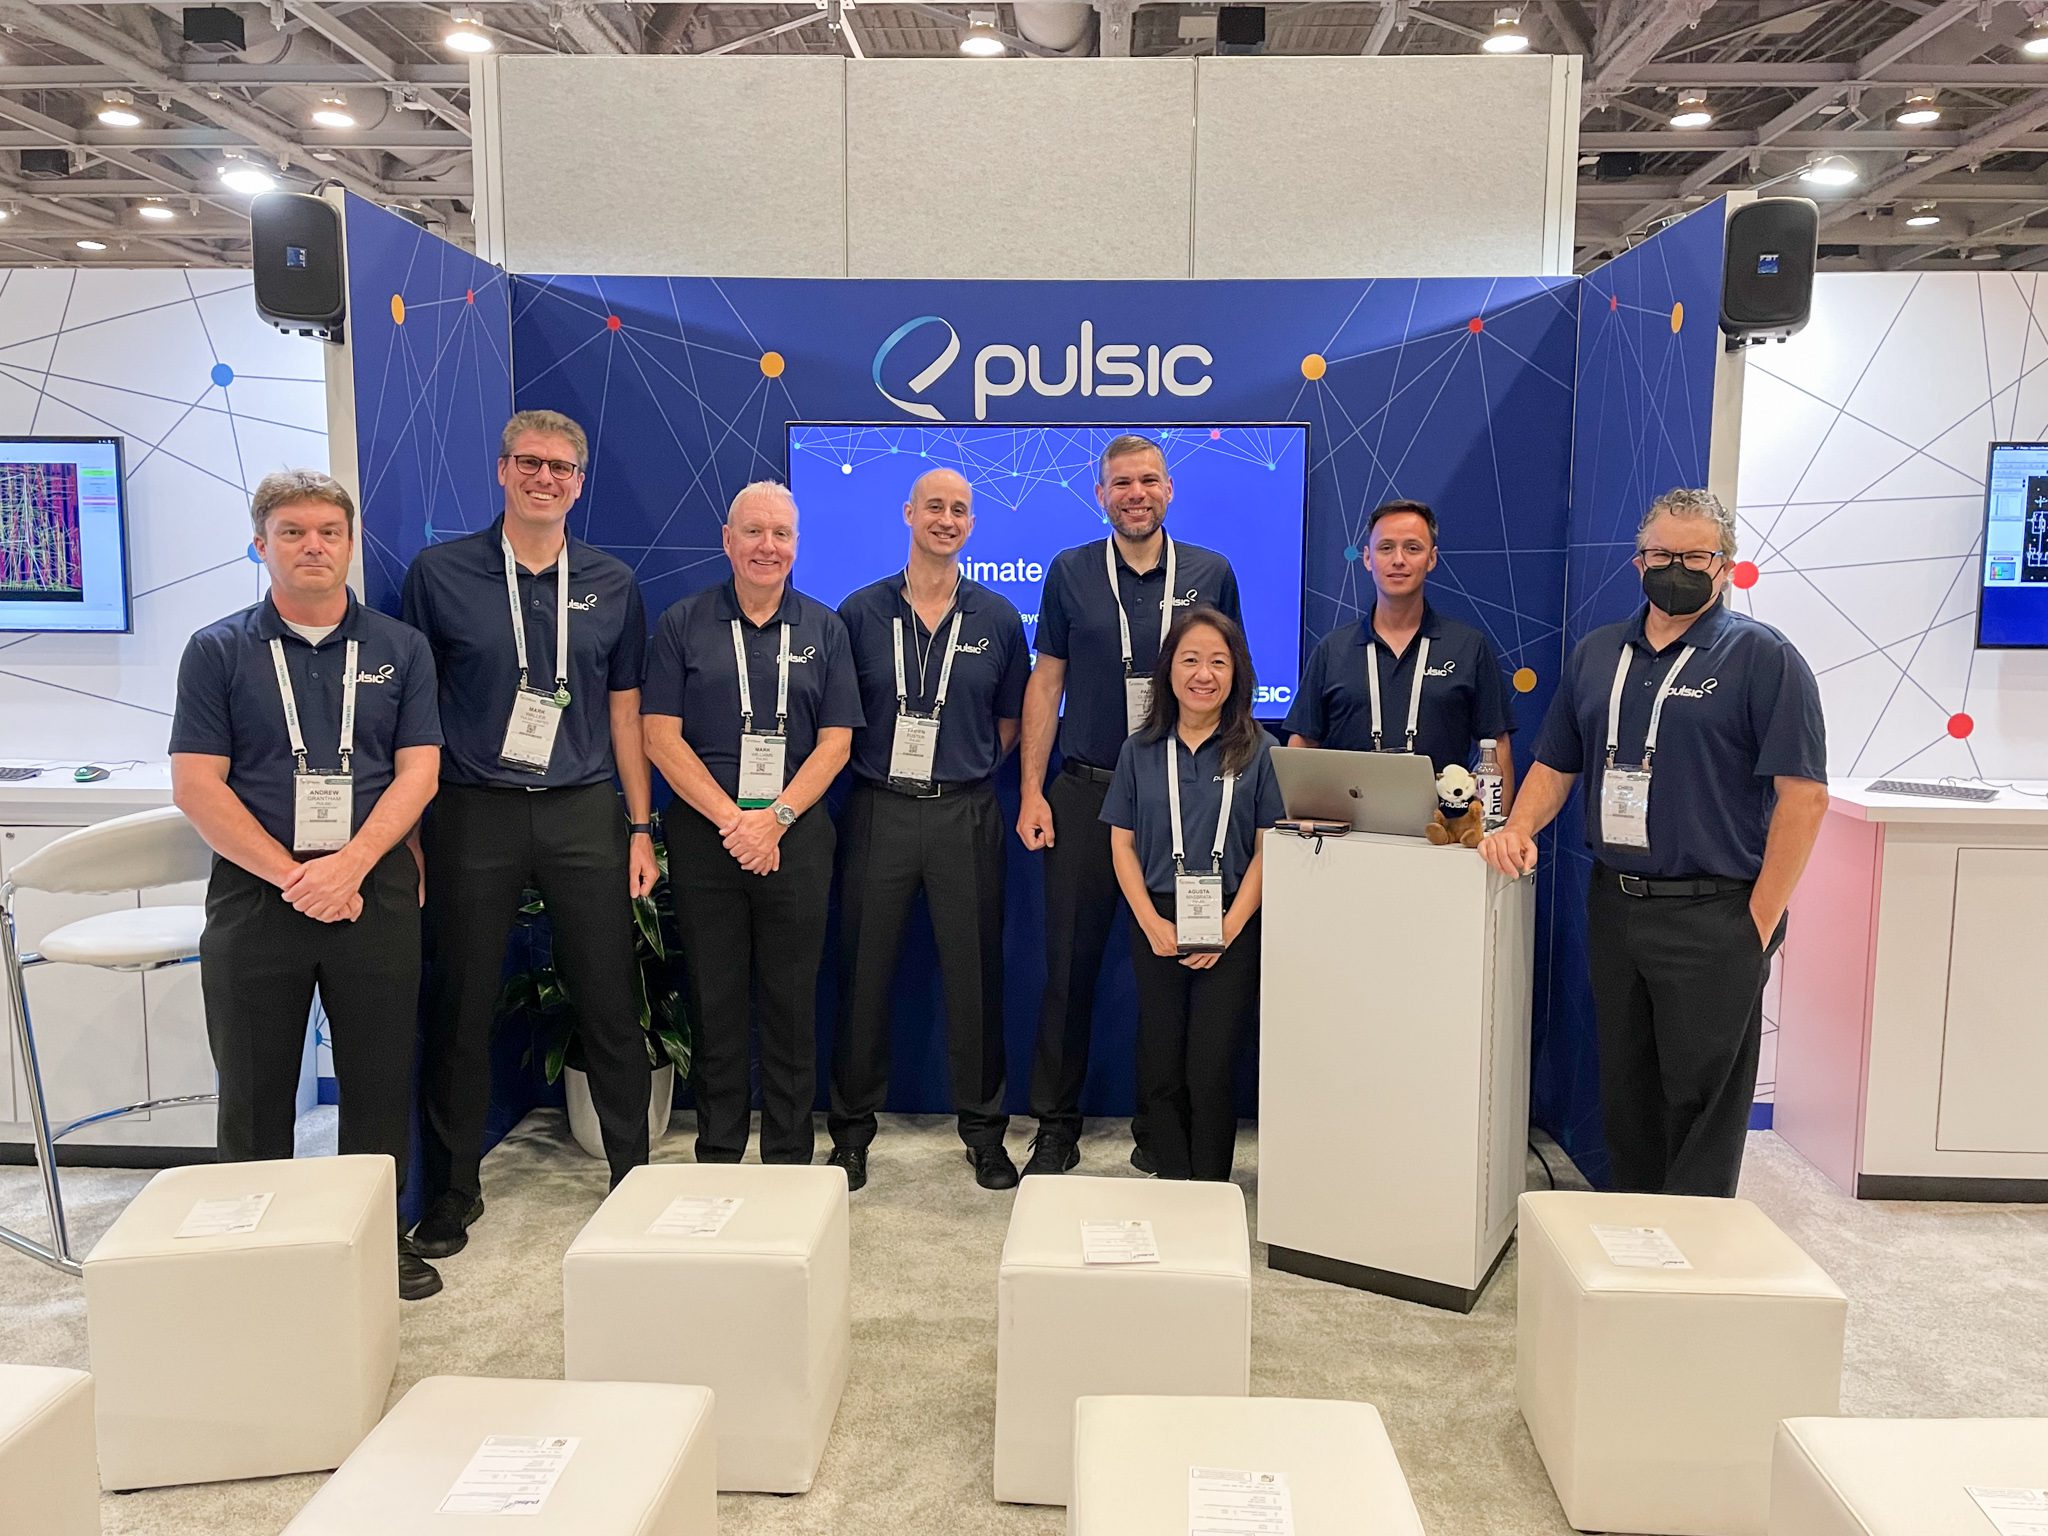 The Pulsic team smiling for the picture at DAC 59. They are all dressed in dark blue with Pulsic polo shirts.